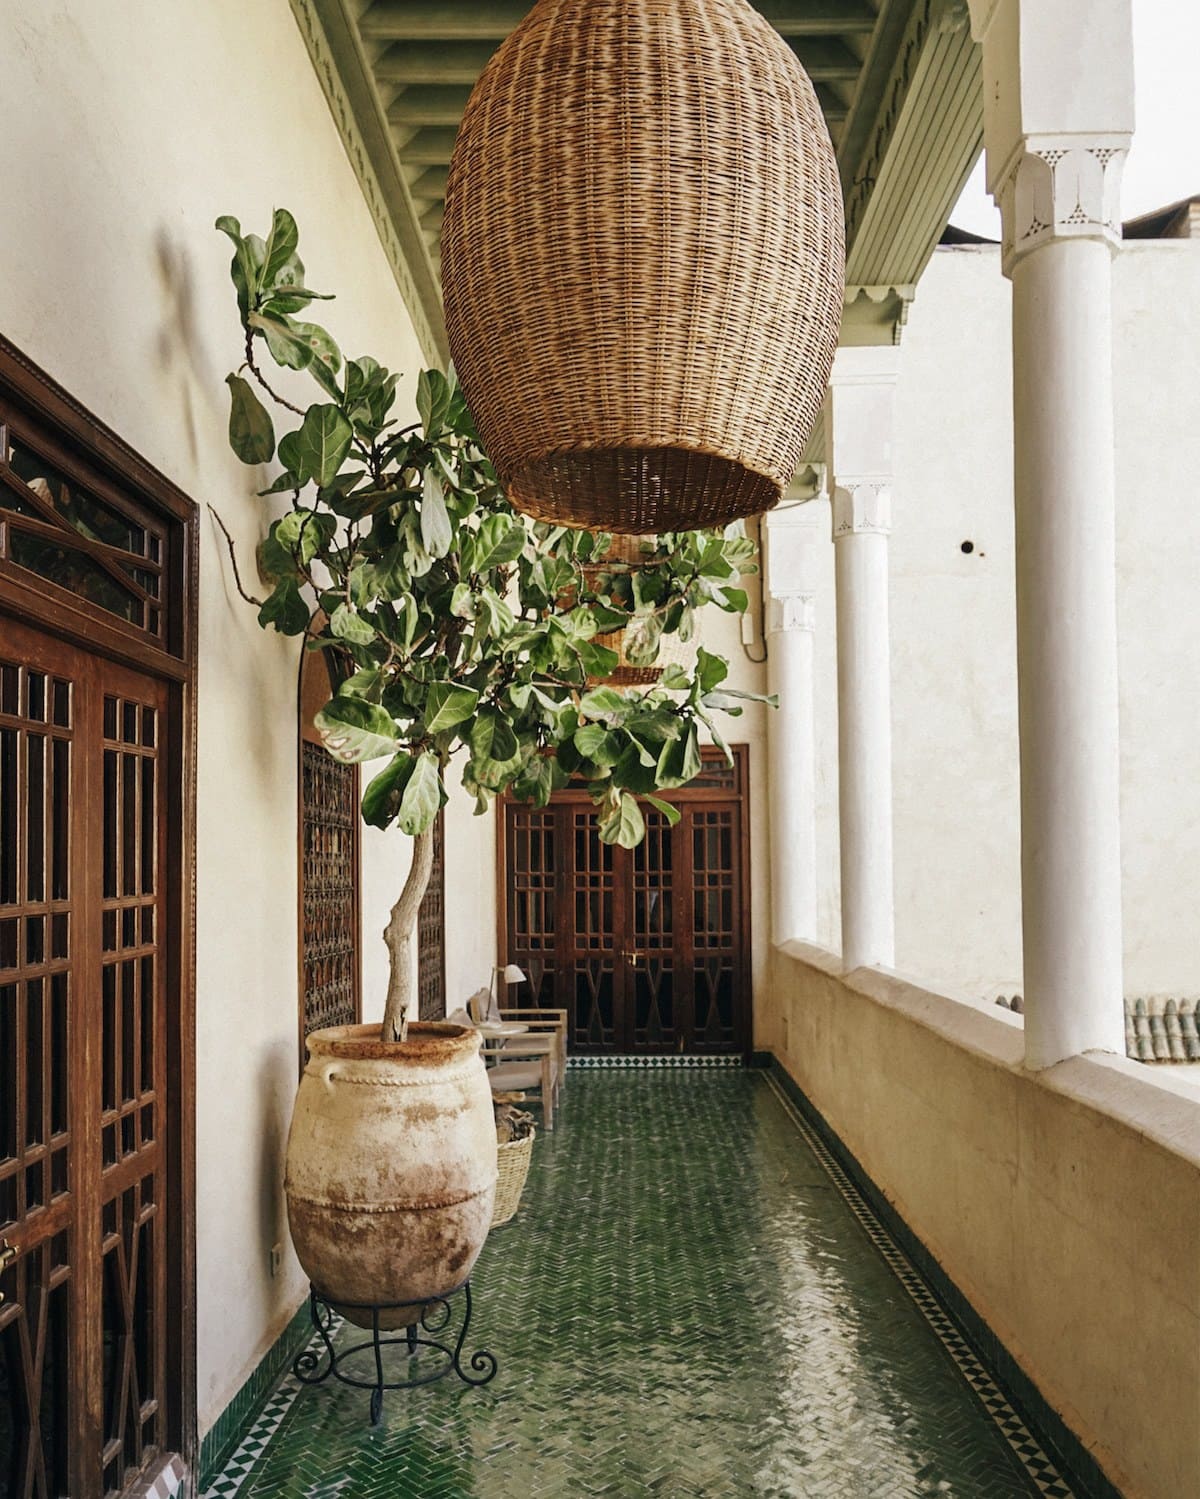 Where to Stay in Marrakech, Morocco: El Fenn Review